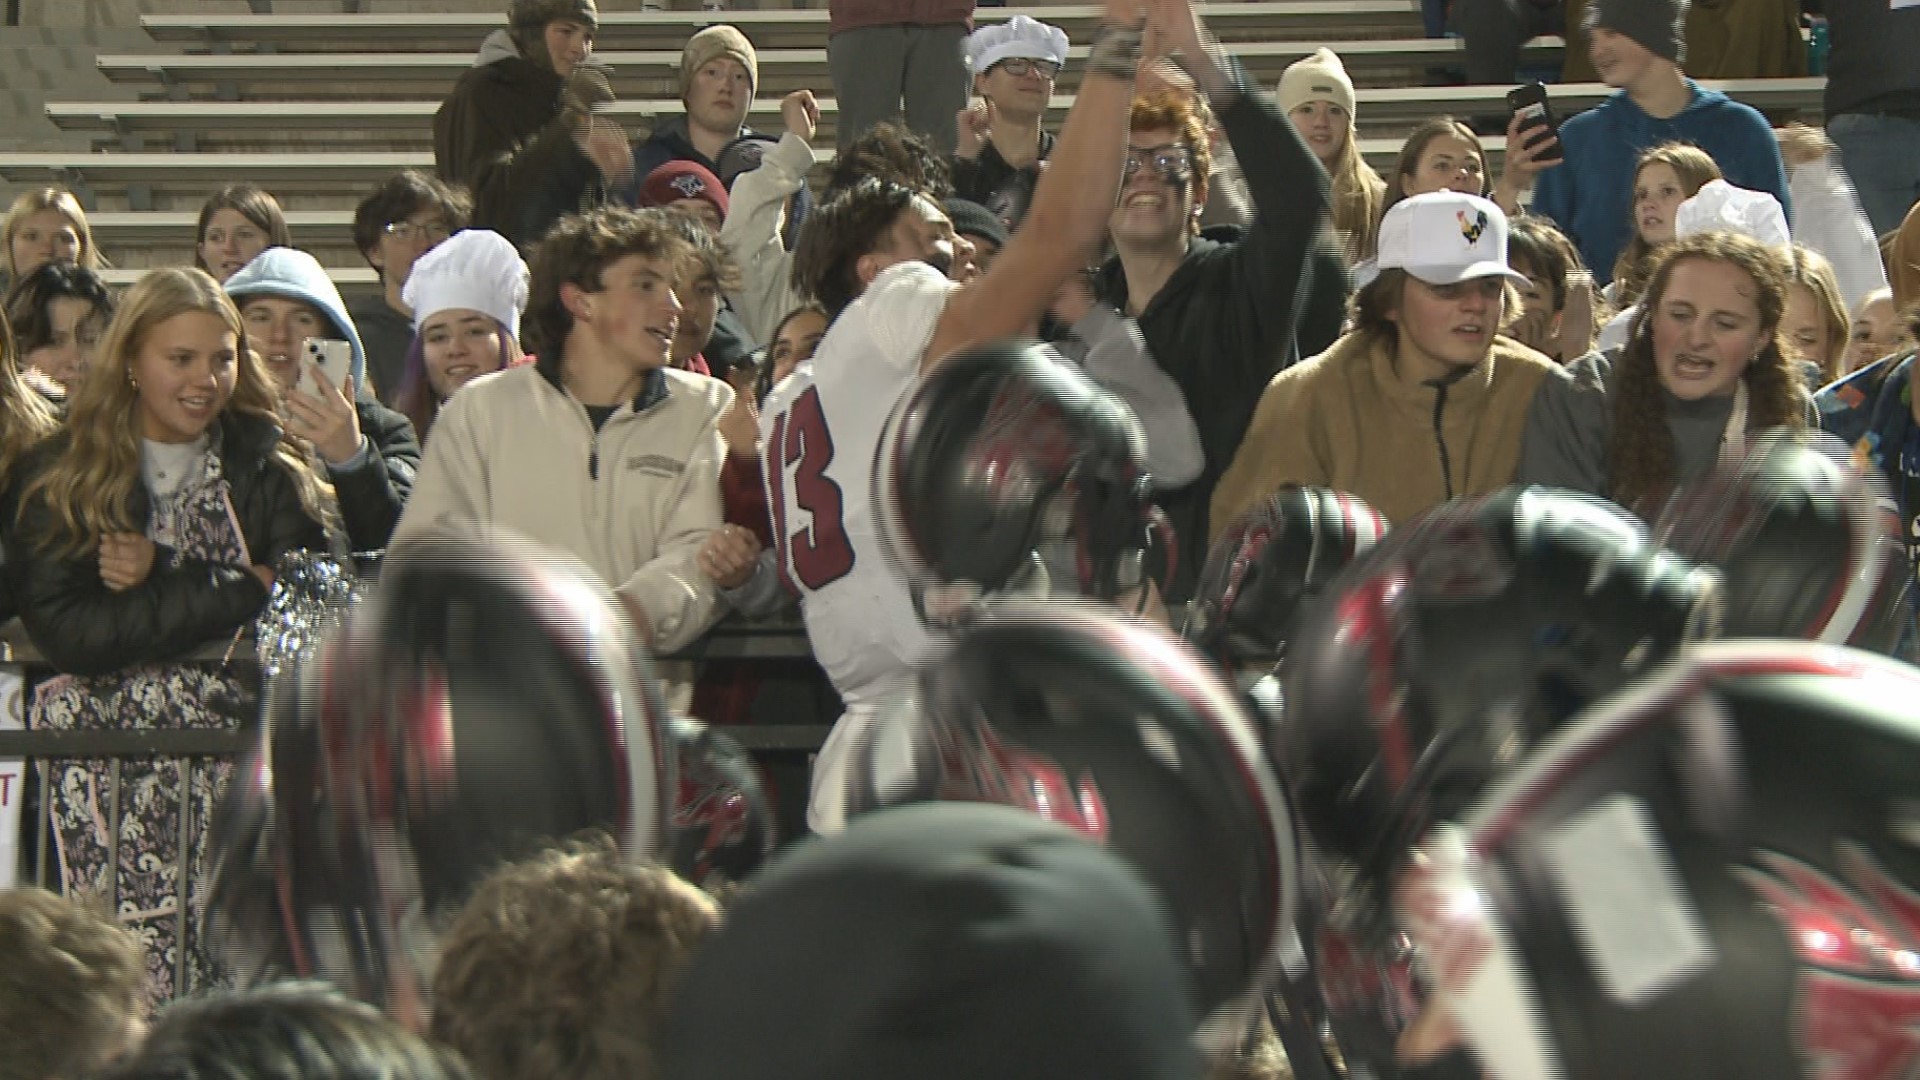 The Chargers defeated the Wolves 37-28 in the Class 5A quarterfinals on Friday night.